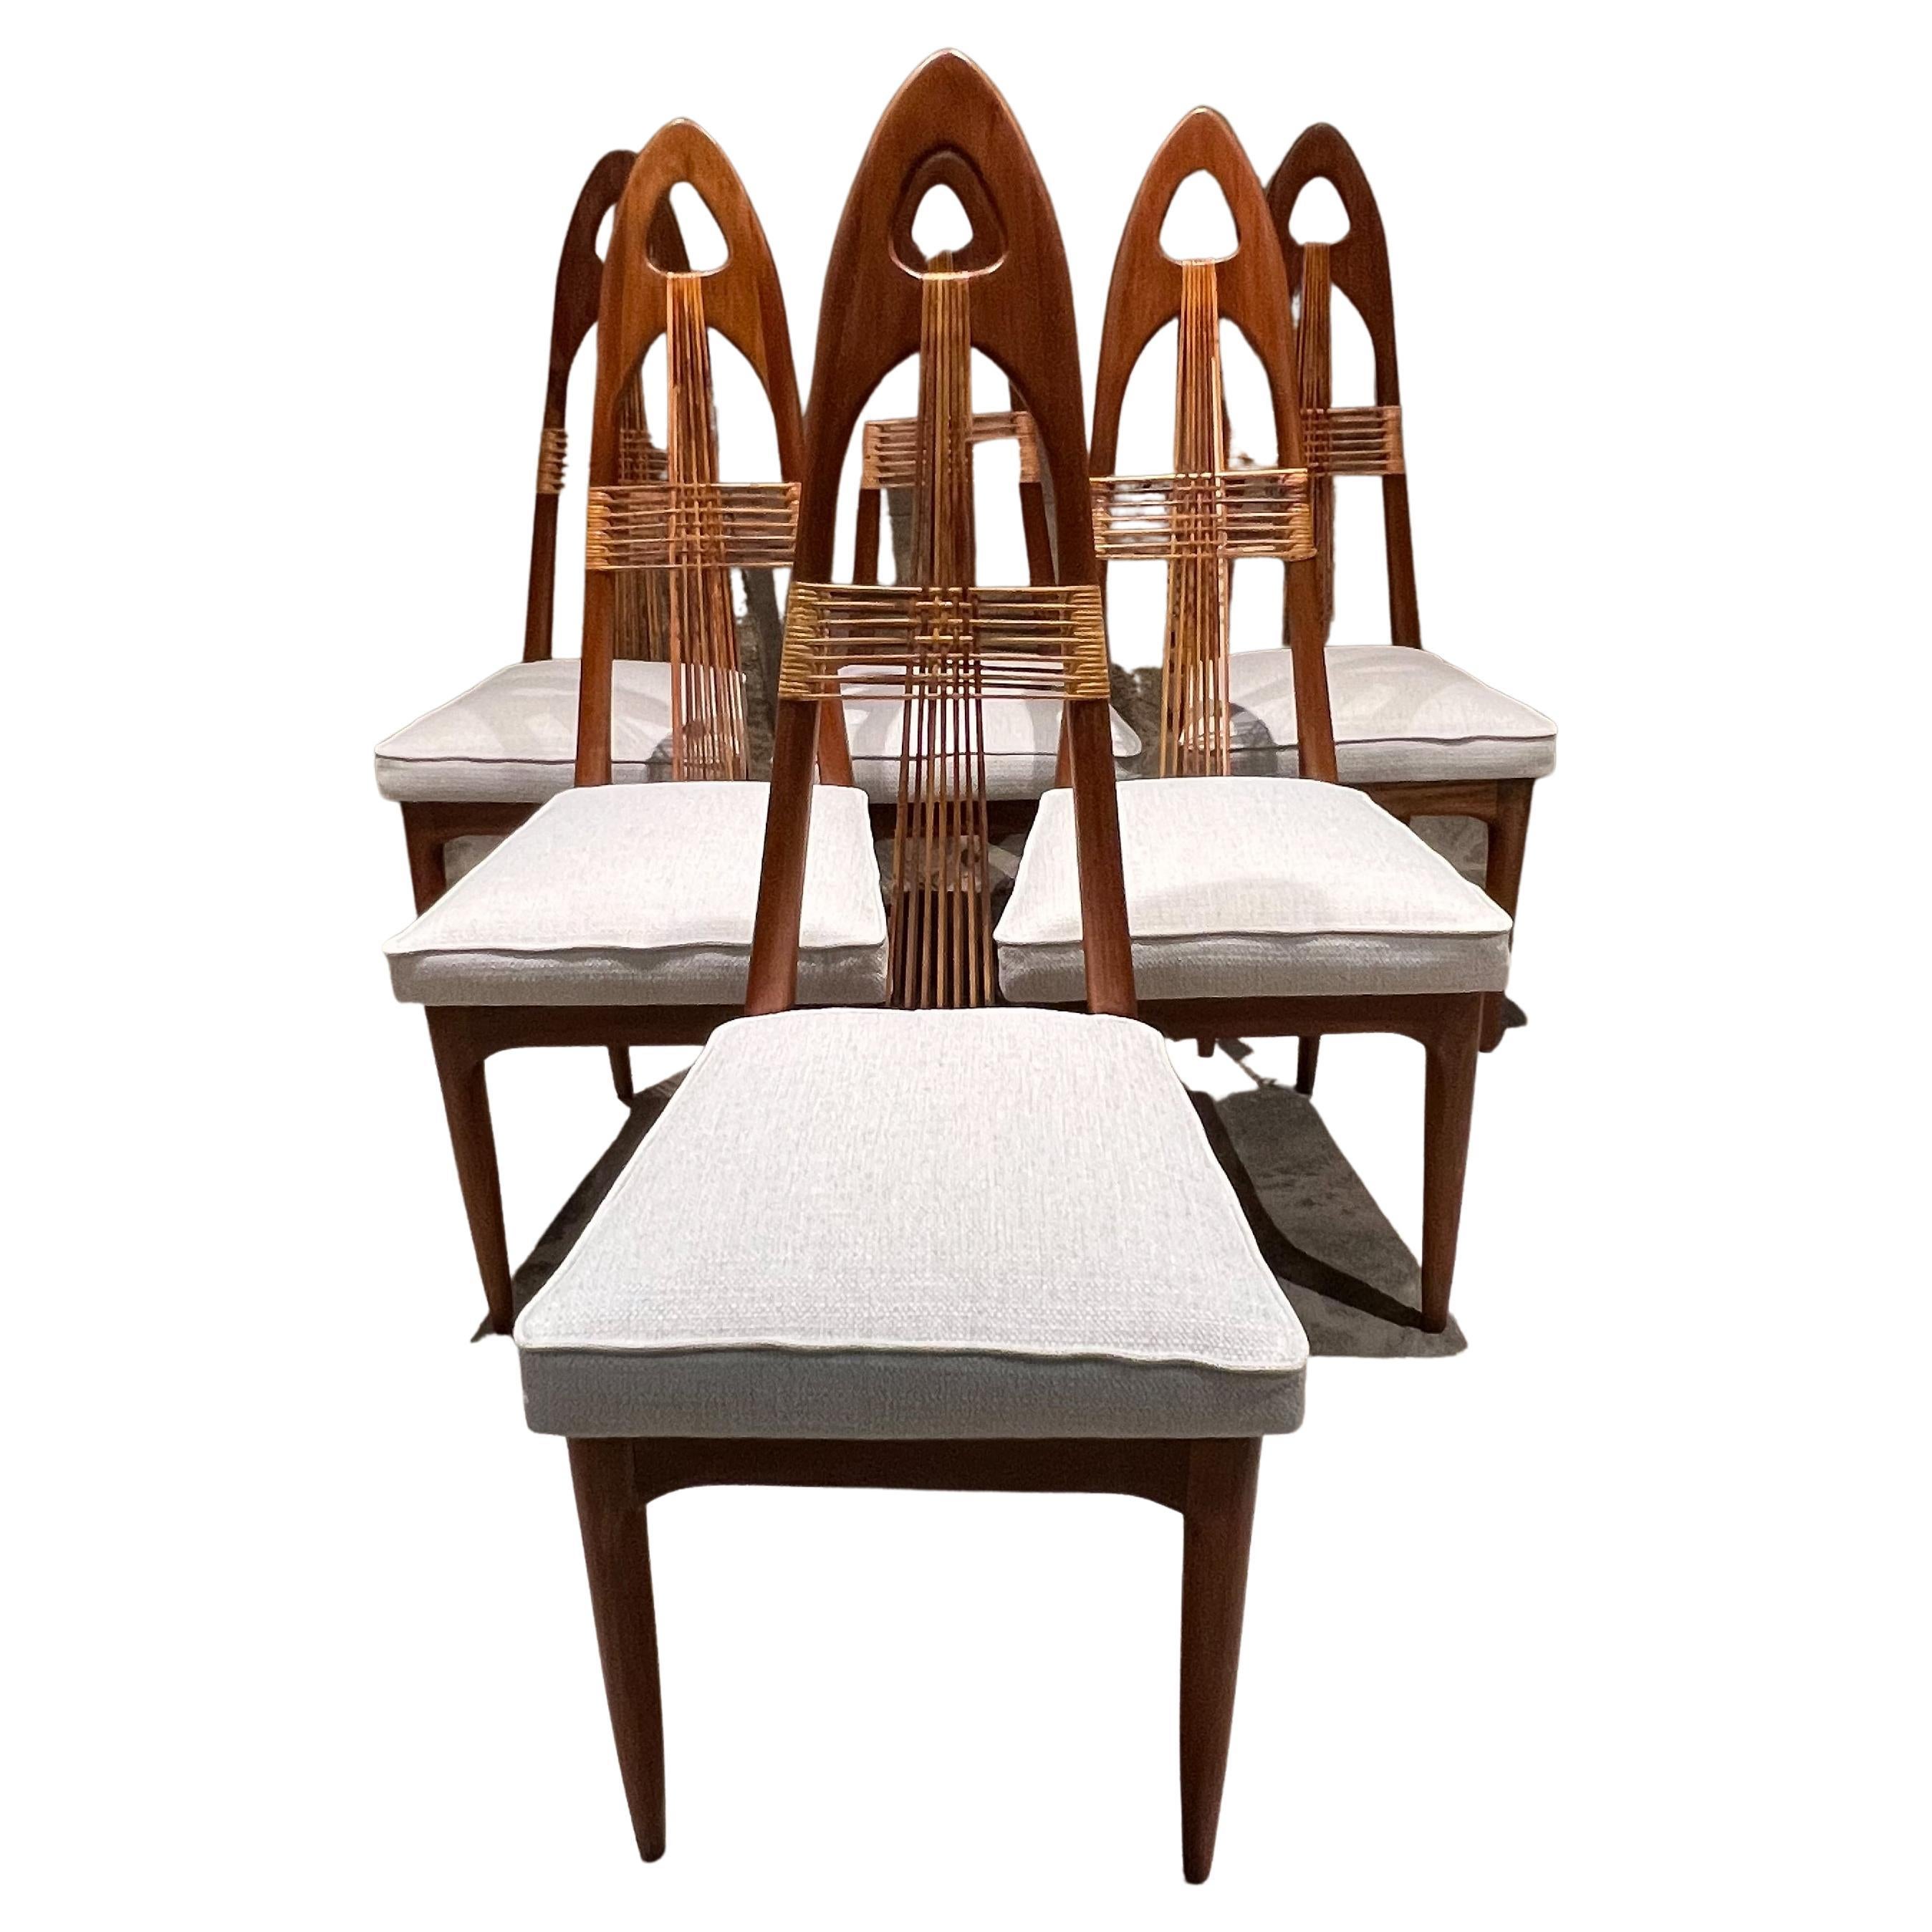 1950s Mexico Six Spectacular Modern Gothic Cross Dining Chairs Mahogany and Cane For Sale